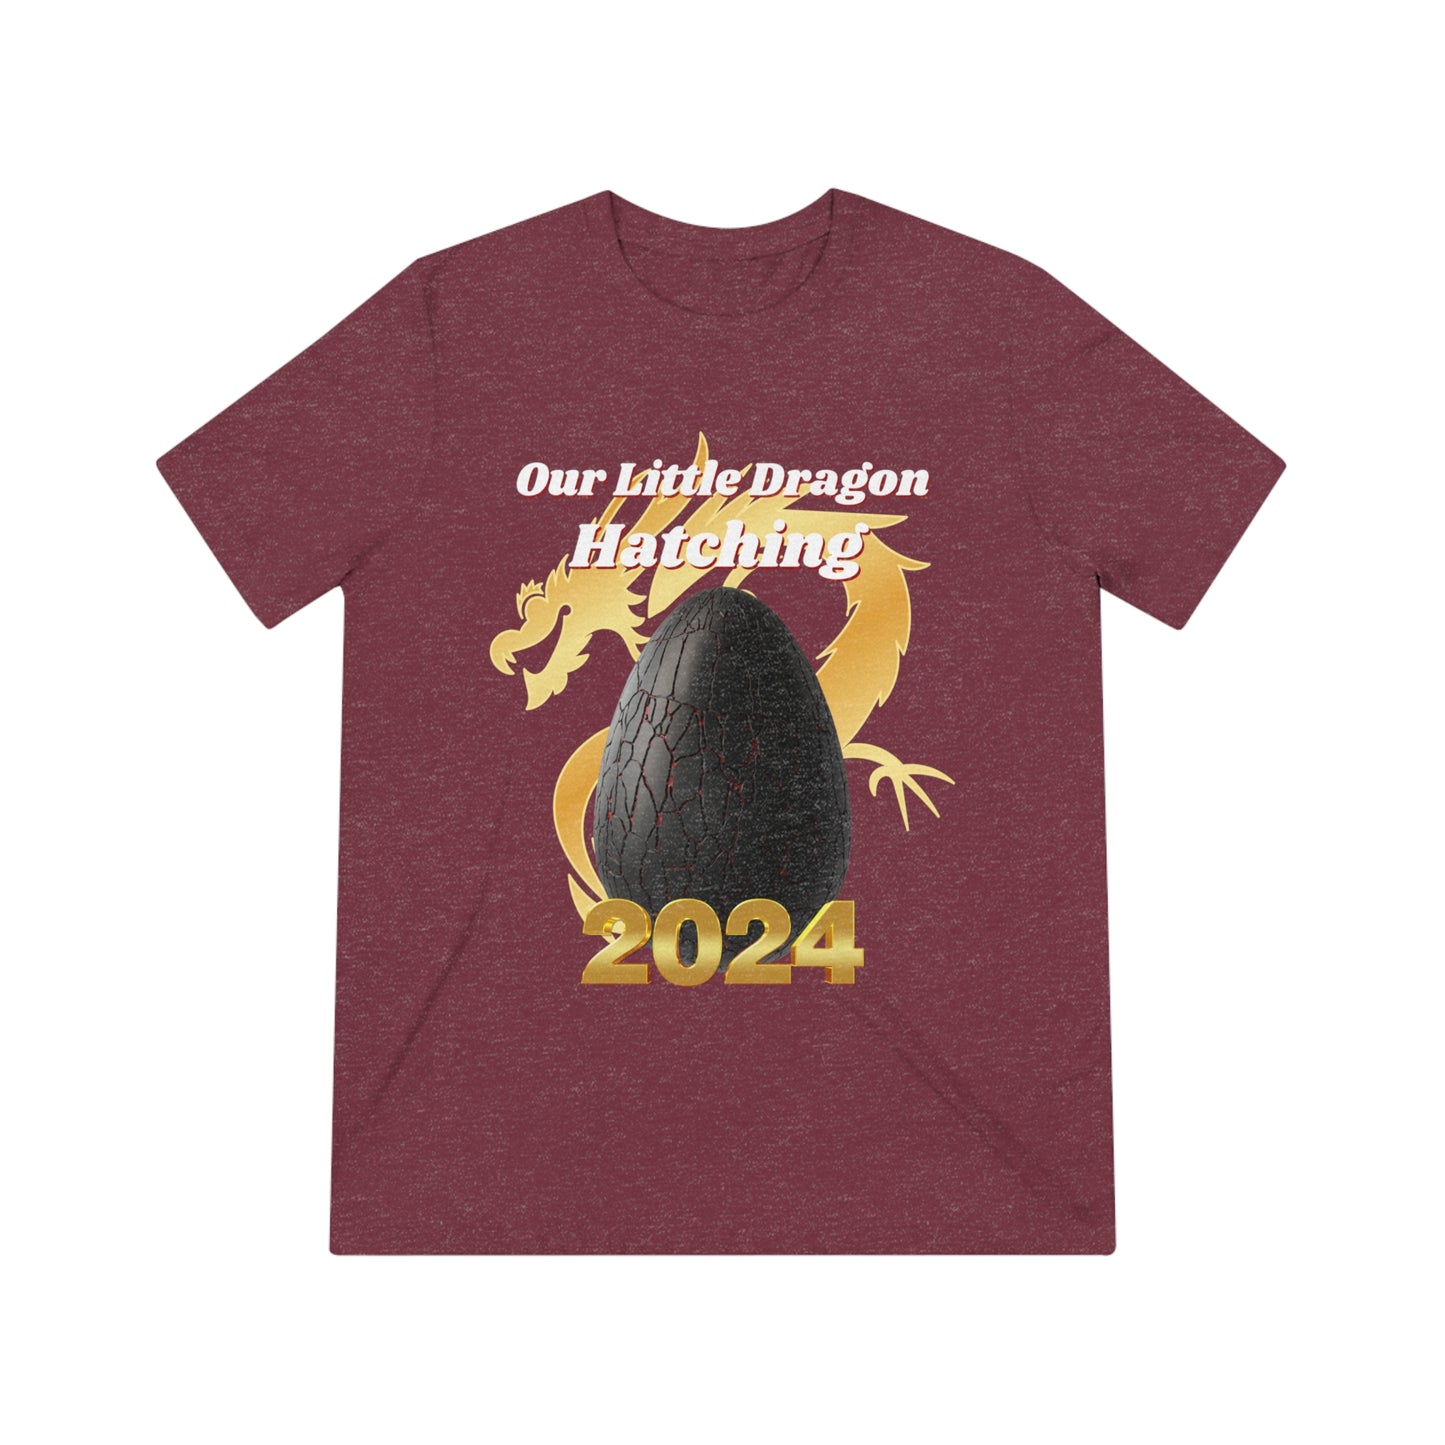 2024 Our Little Dragon Hatching Unisex Triblend Tee